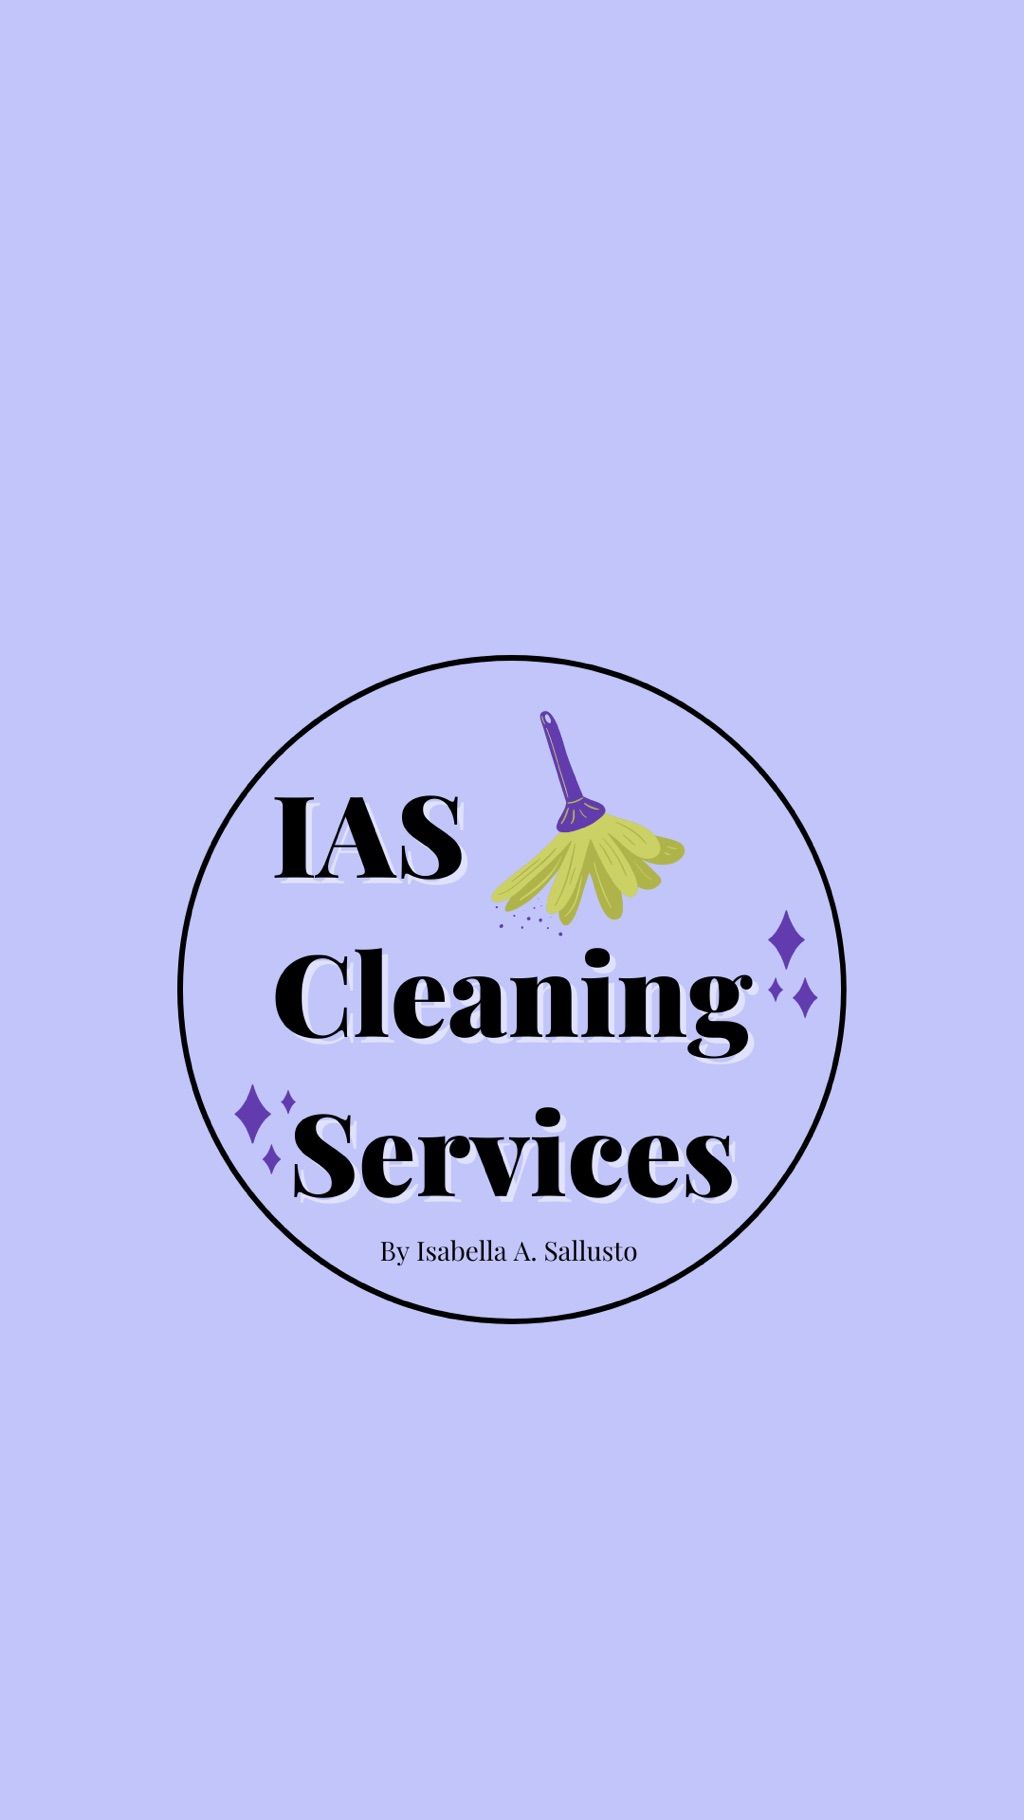 IAS Cleaning Services